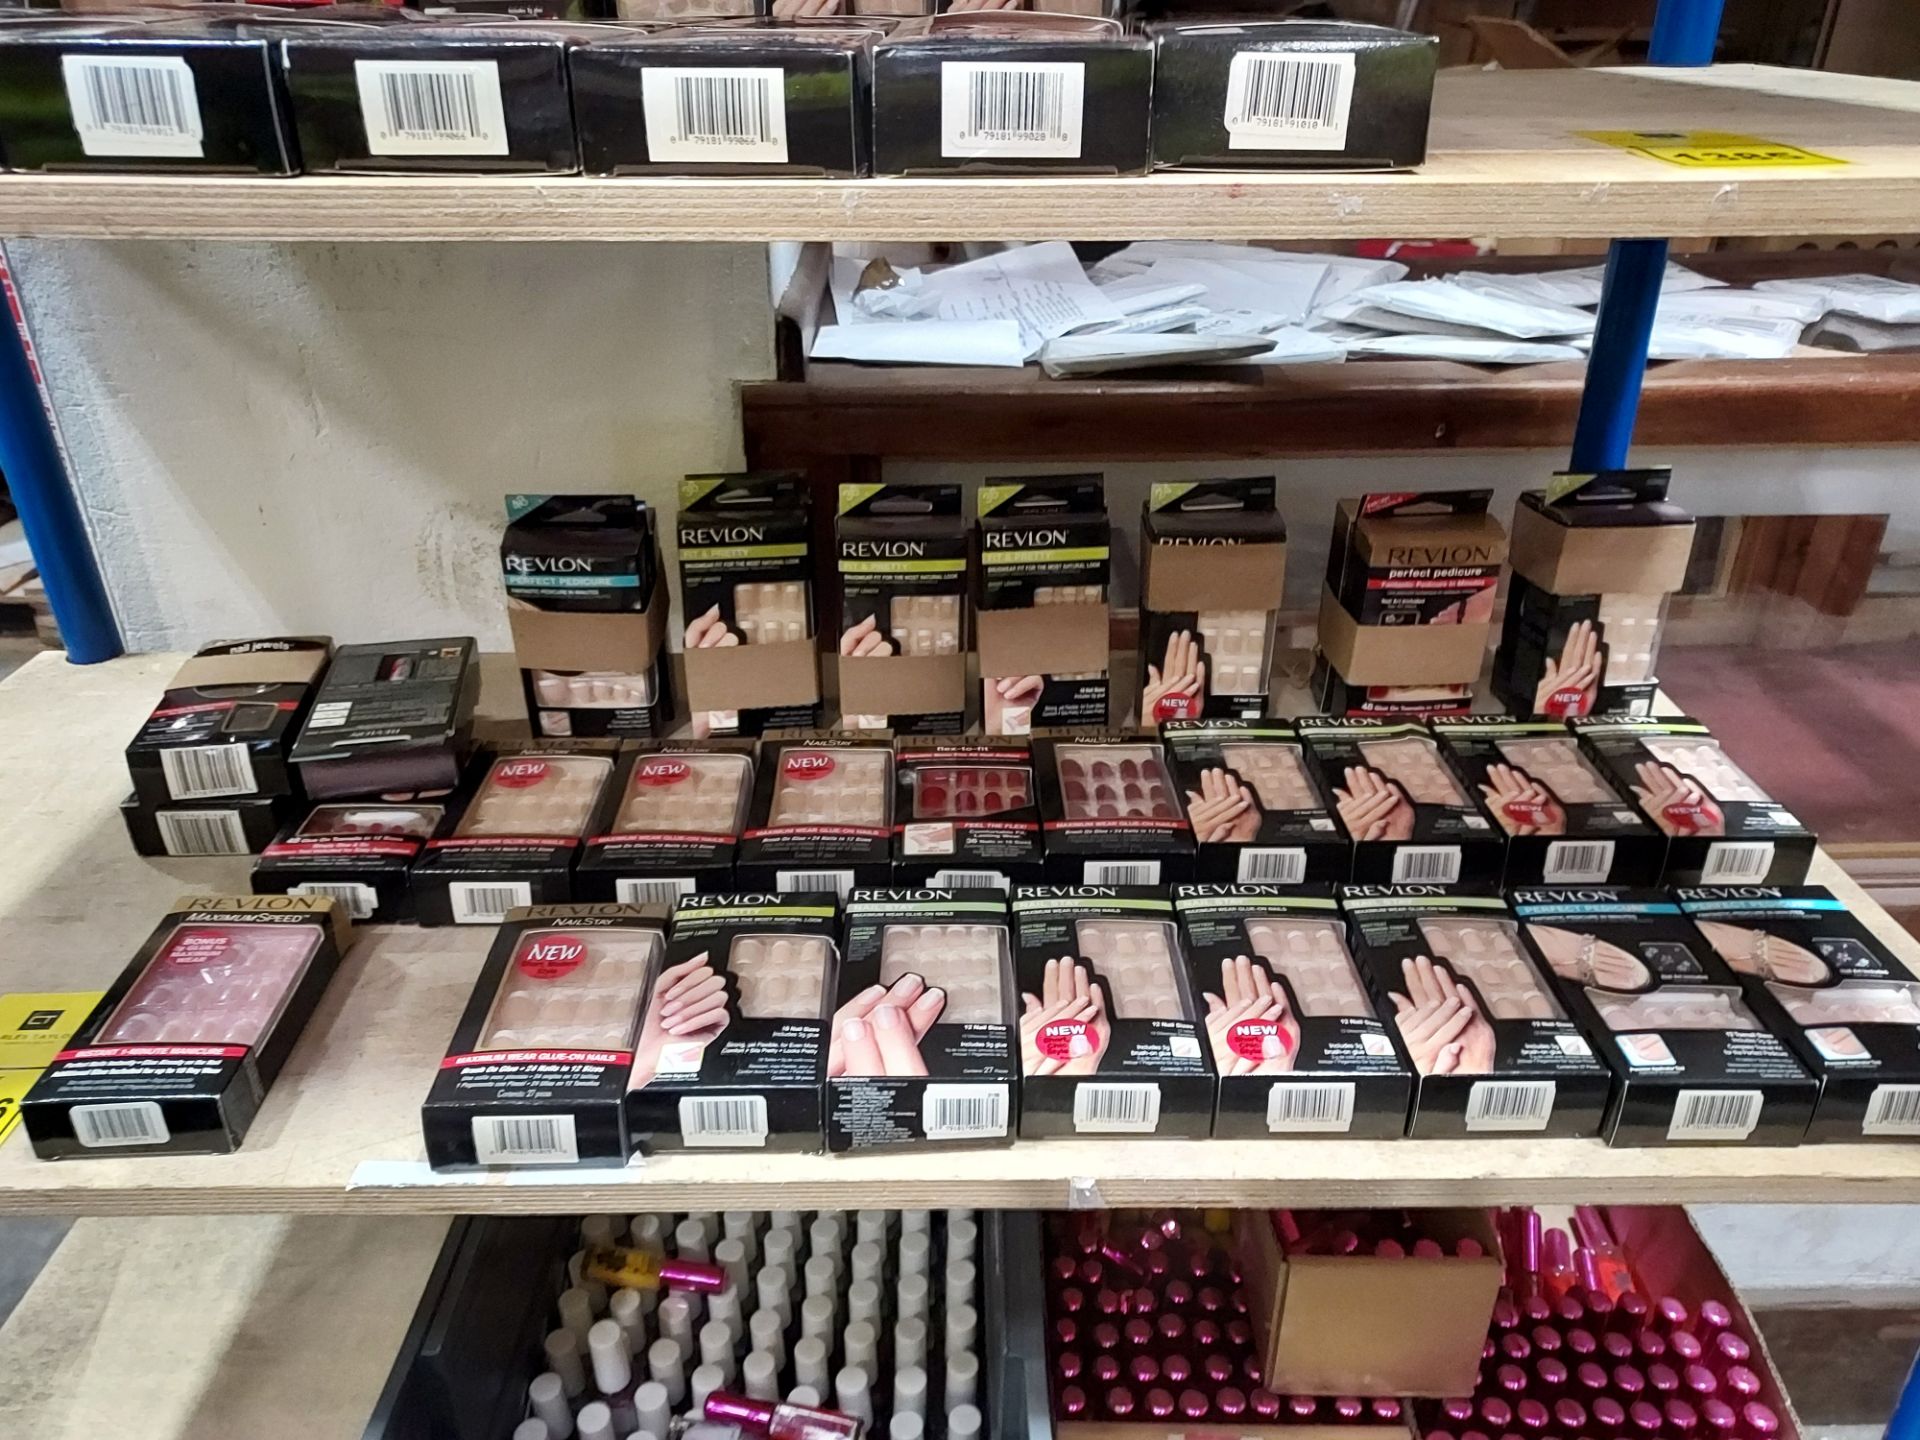 35 PIECE MIXED REVLON COSMETIC LOT CONTAINING REVLON NAIL STAYS IN NUDE, RED AND PINK, REVLON NAIL